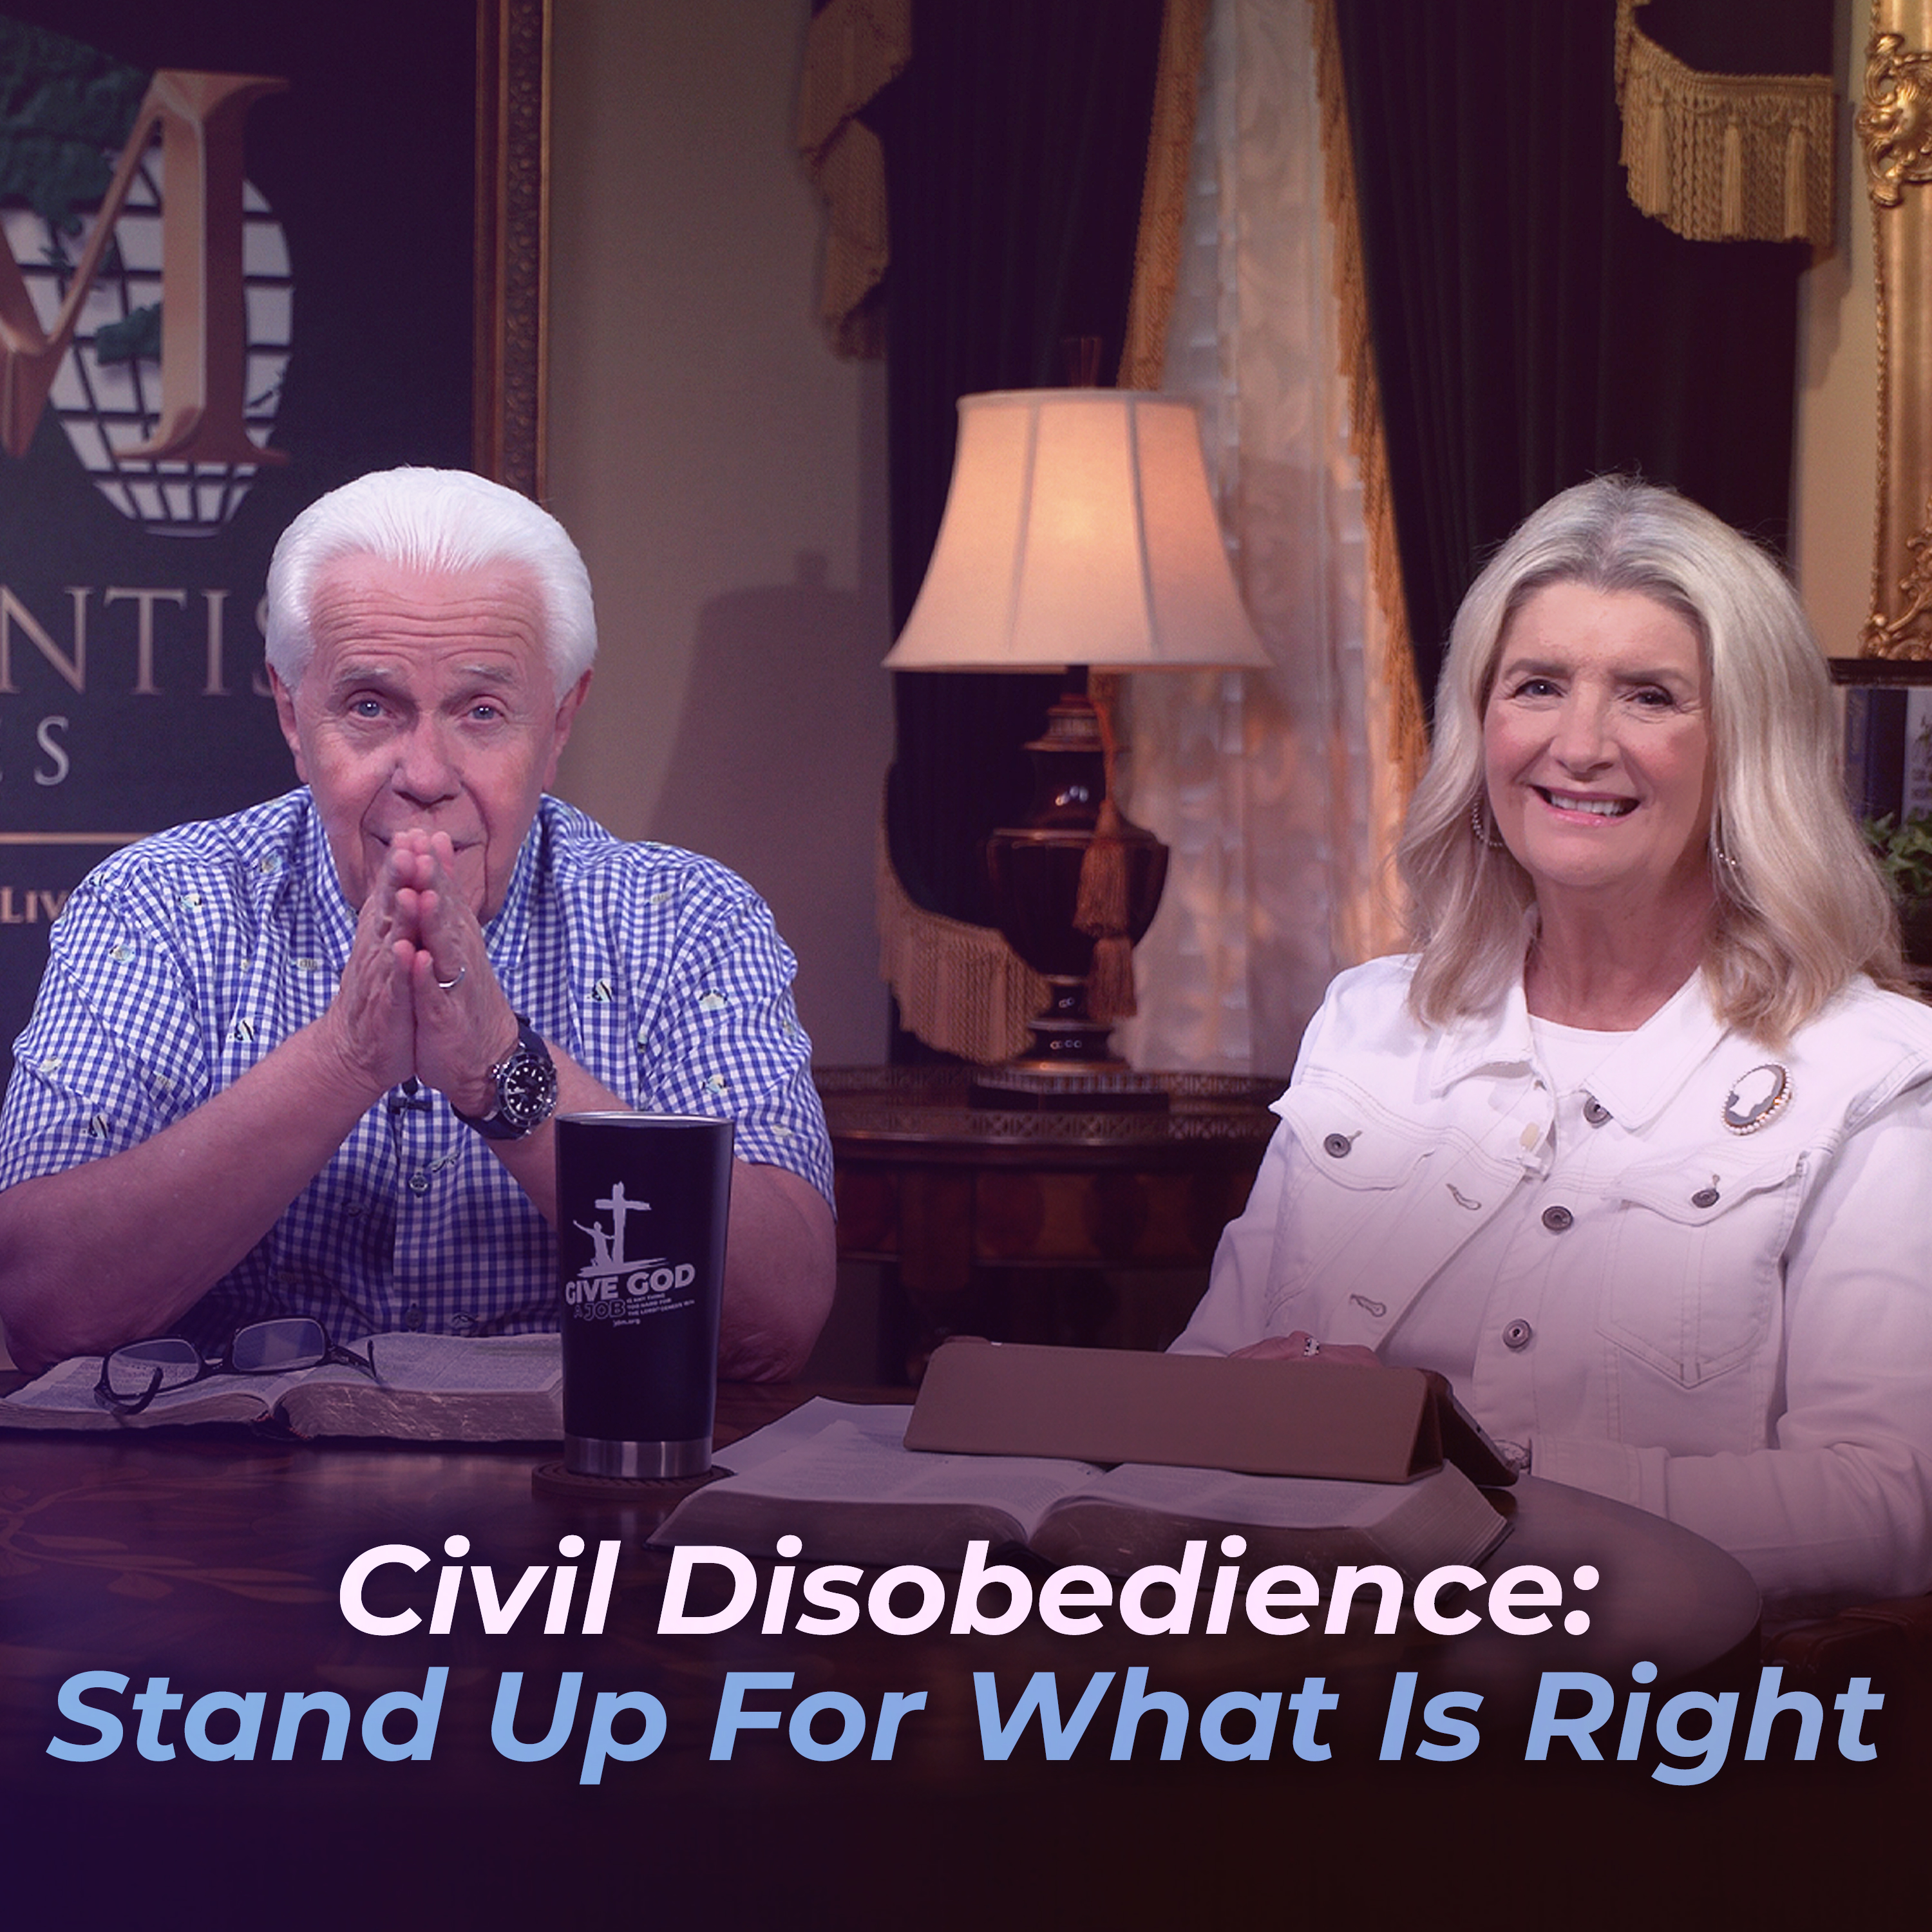 Civil Disobedience: Stand Up For What Is Right